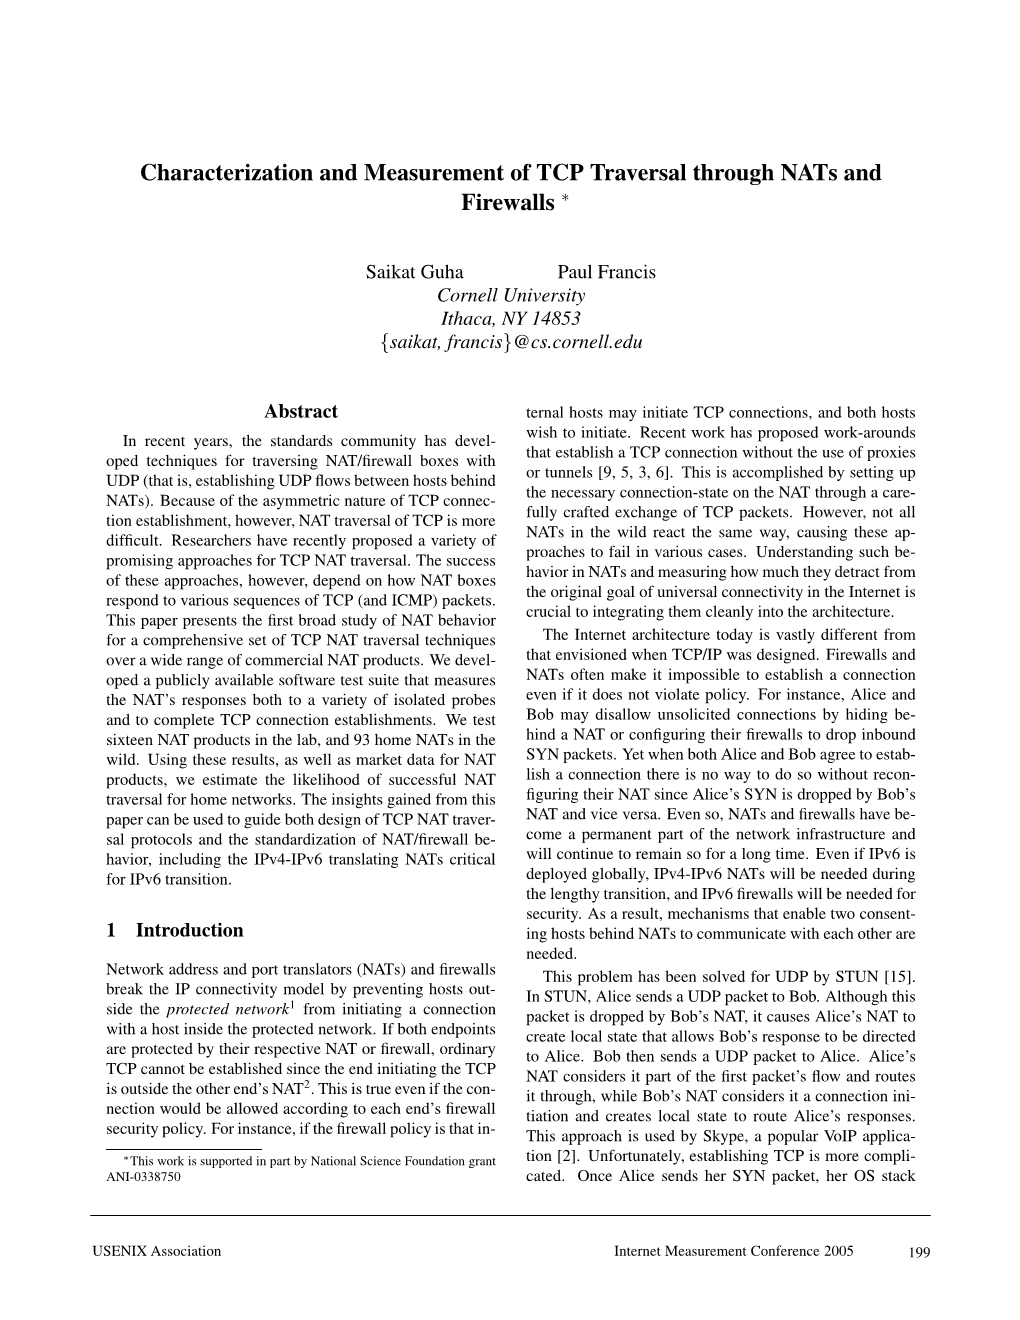 Characterization and Measurement of TCP Traversal Through Nats and Firewalls ∗